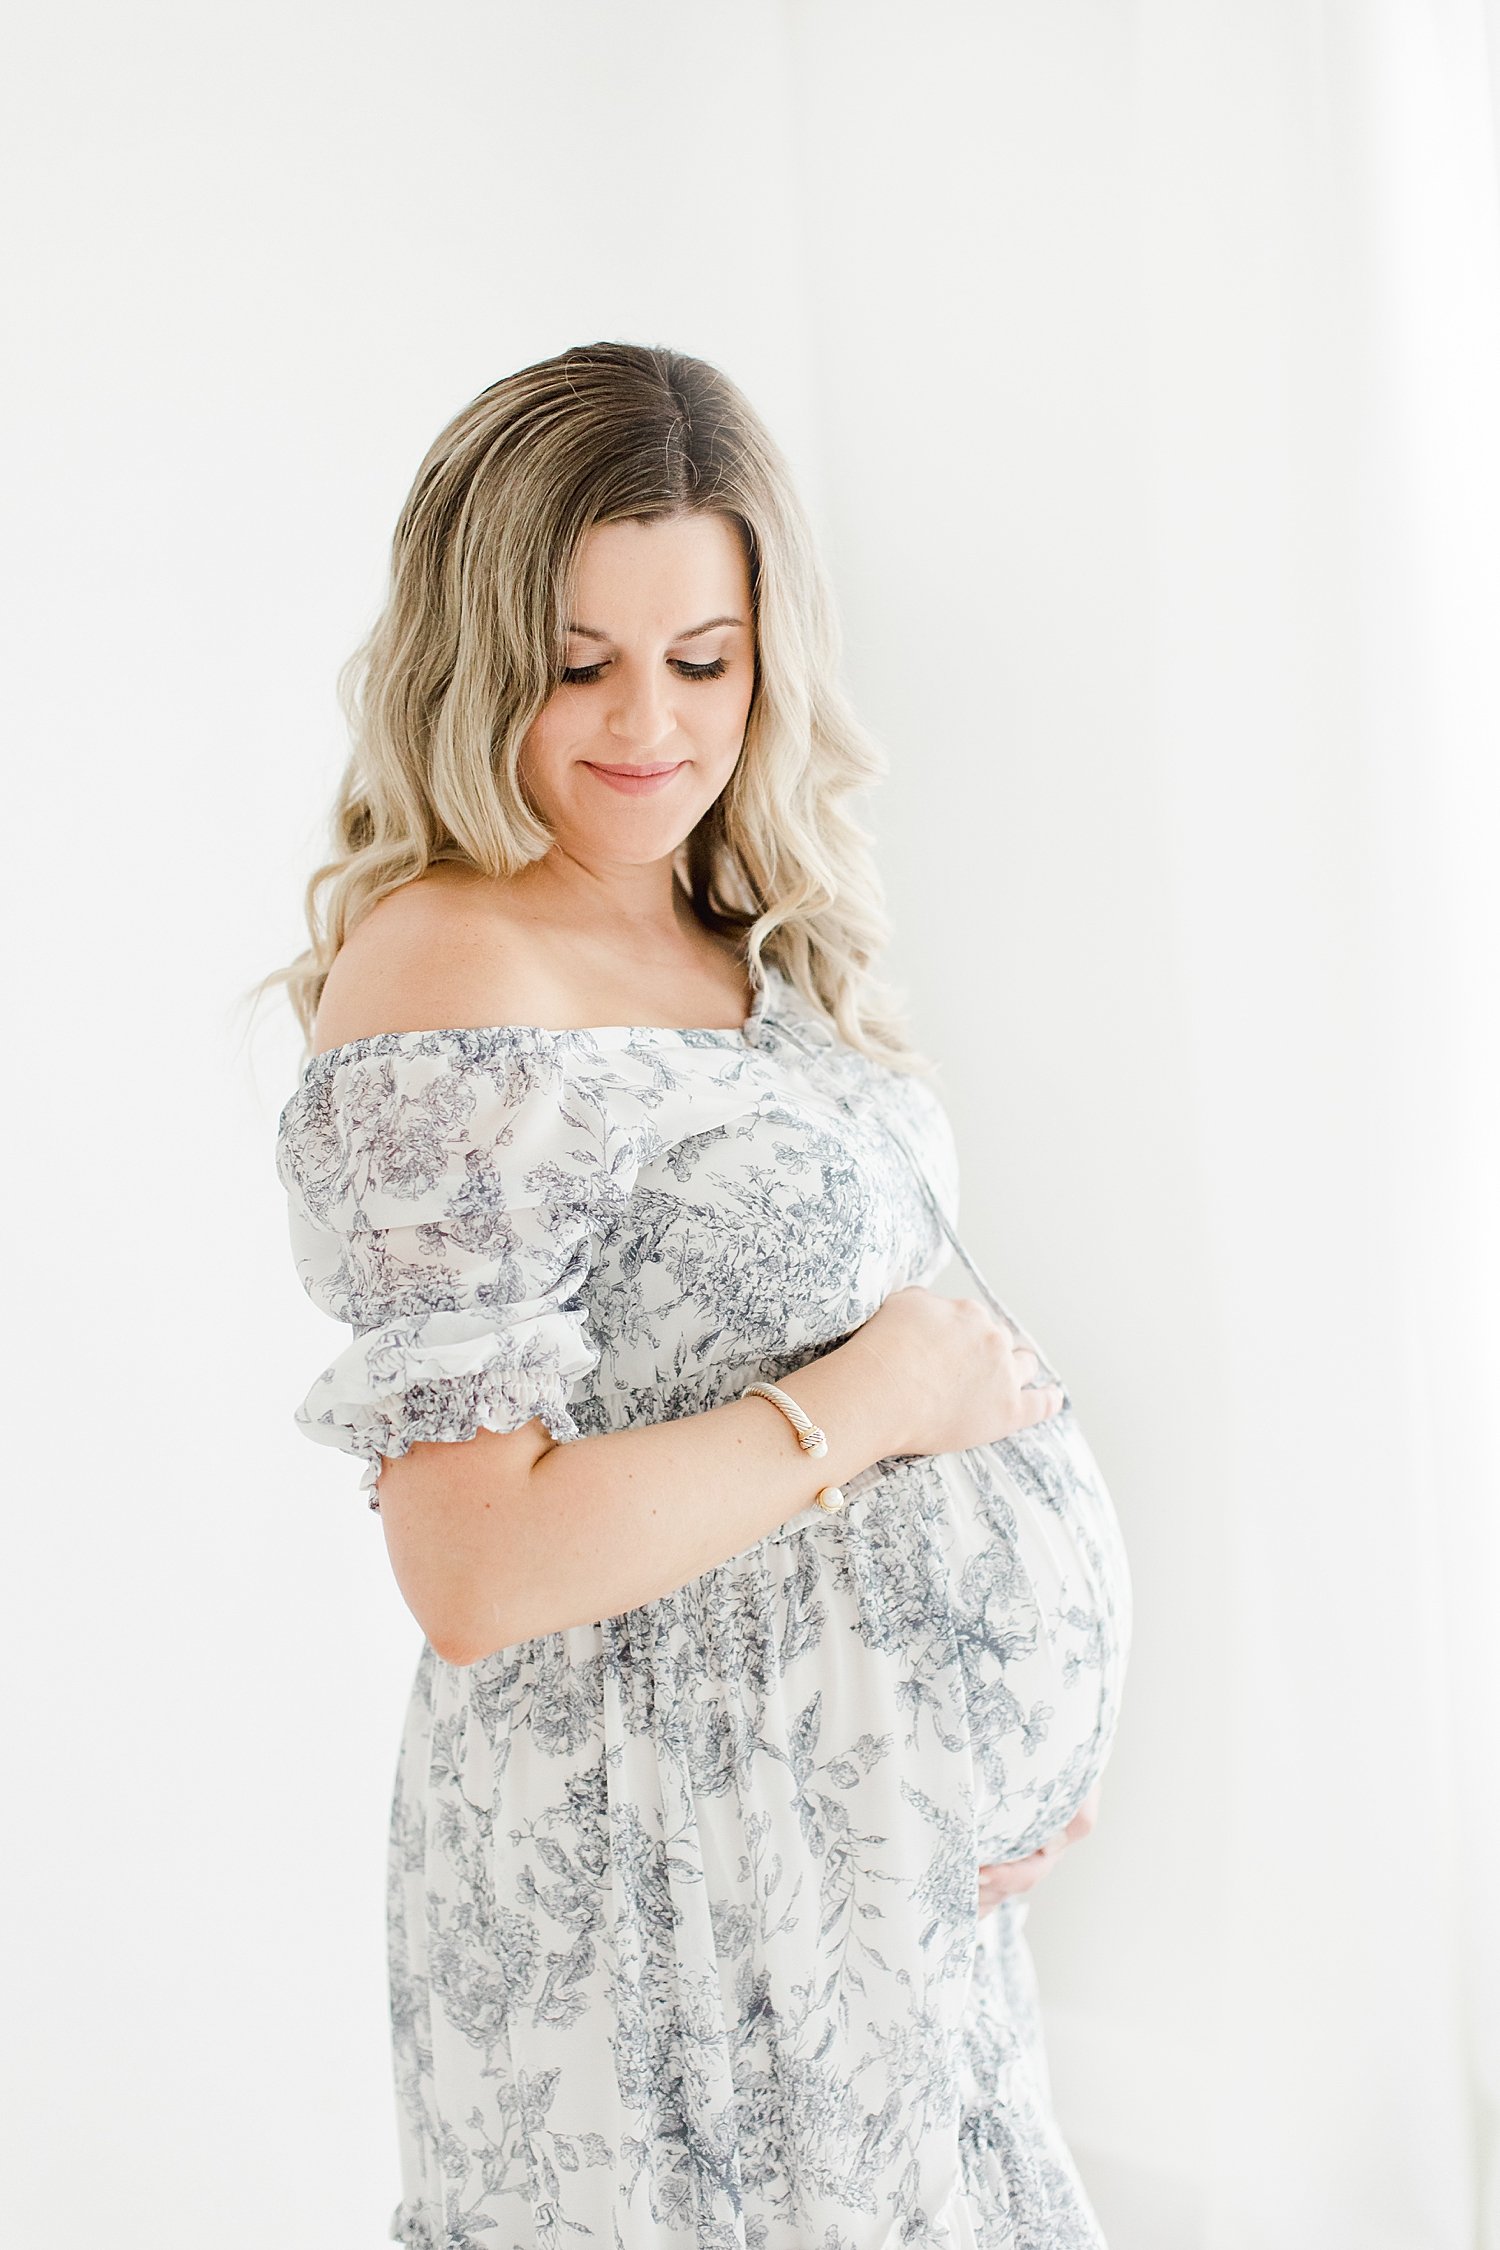 Mom-to-be wearing floral dress for studio maternity session with Kristin Wood Photography.